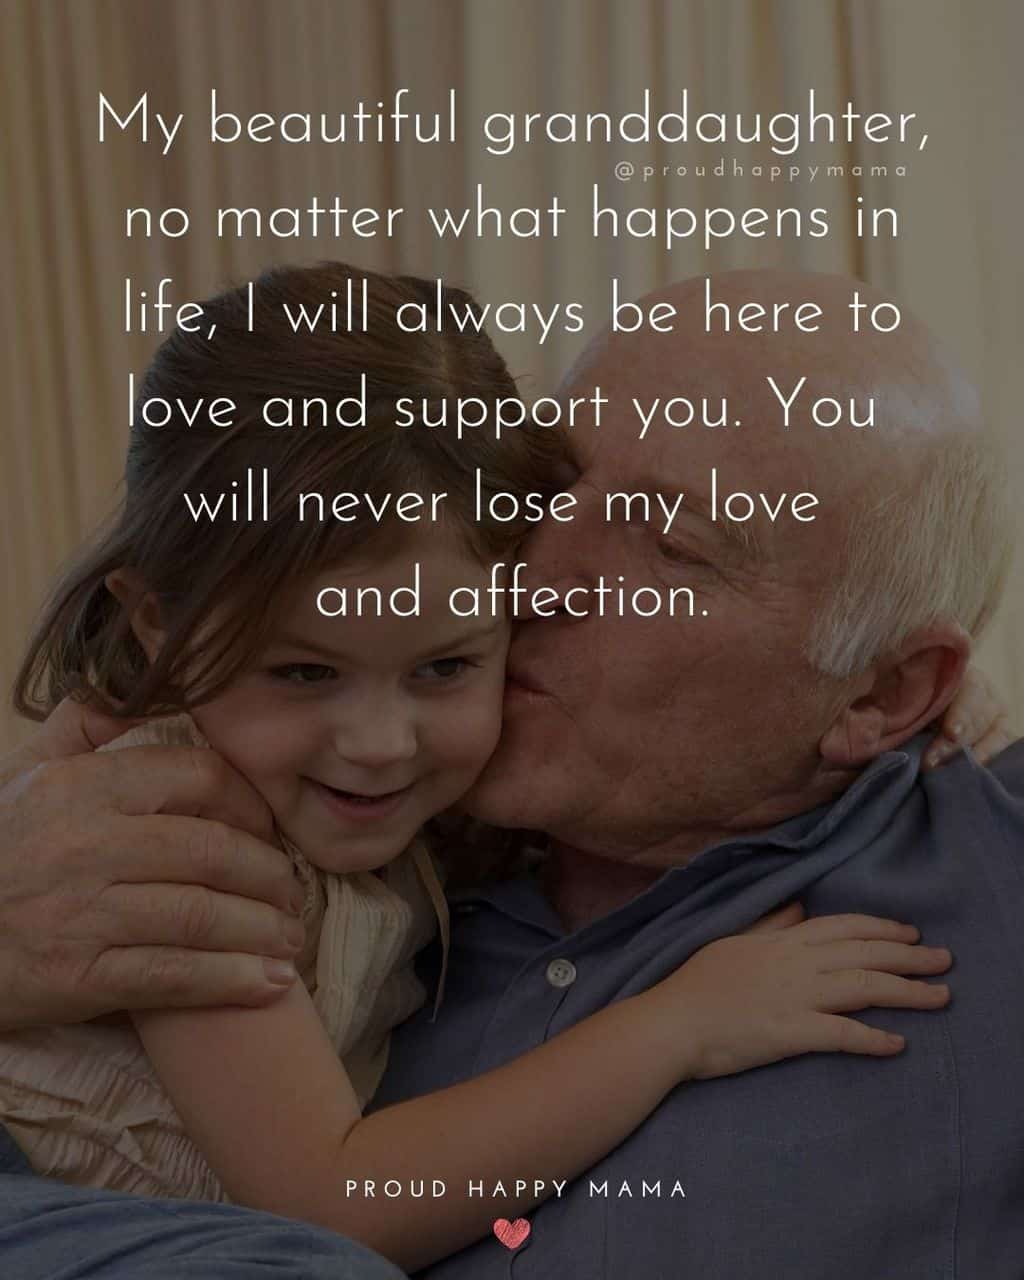 Granddaughter Quotes - My beautiful granddaughter, no matter what happens in life, I will always be here to love and support